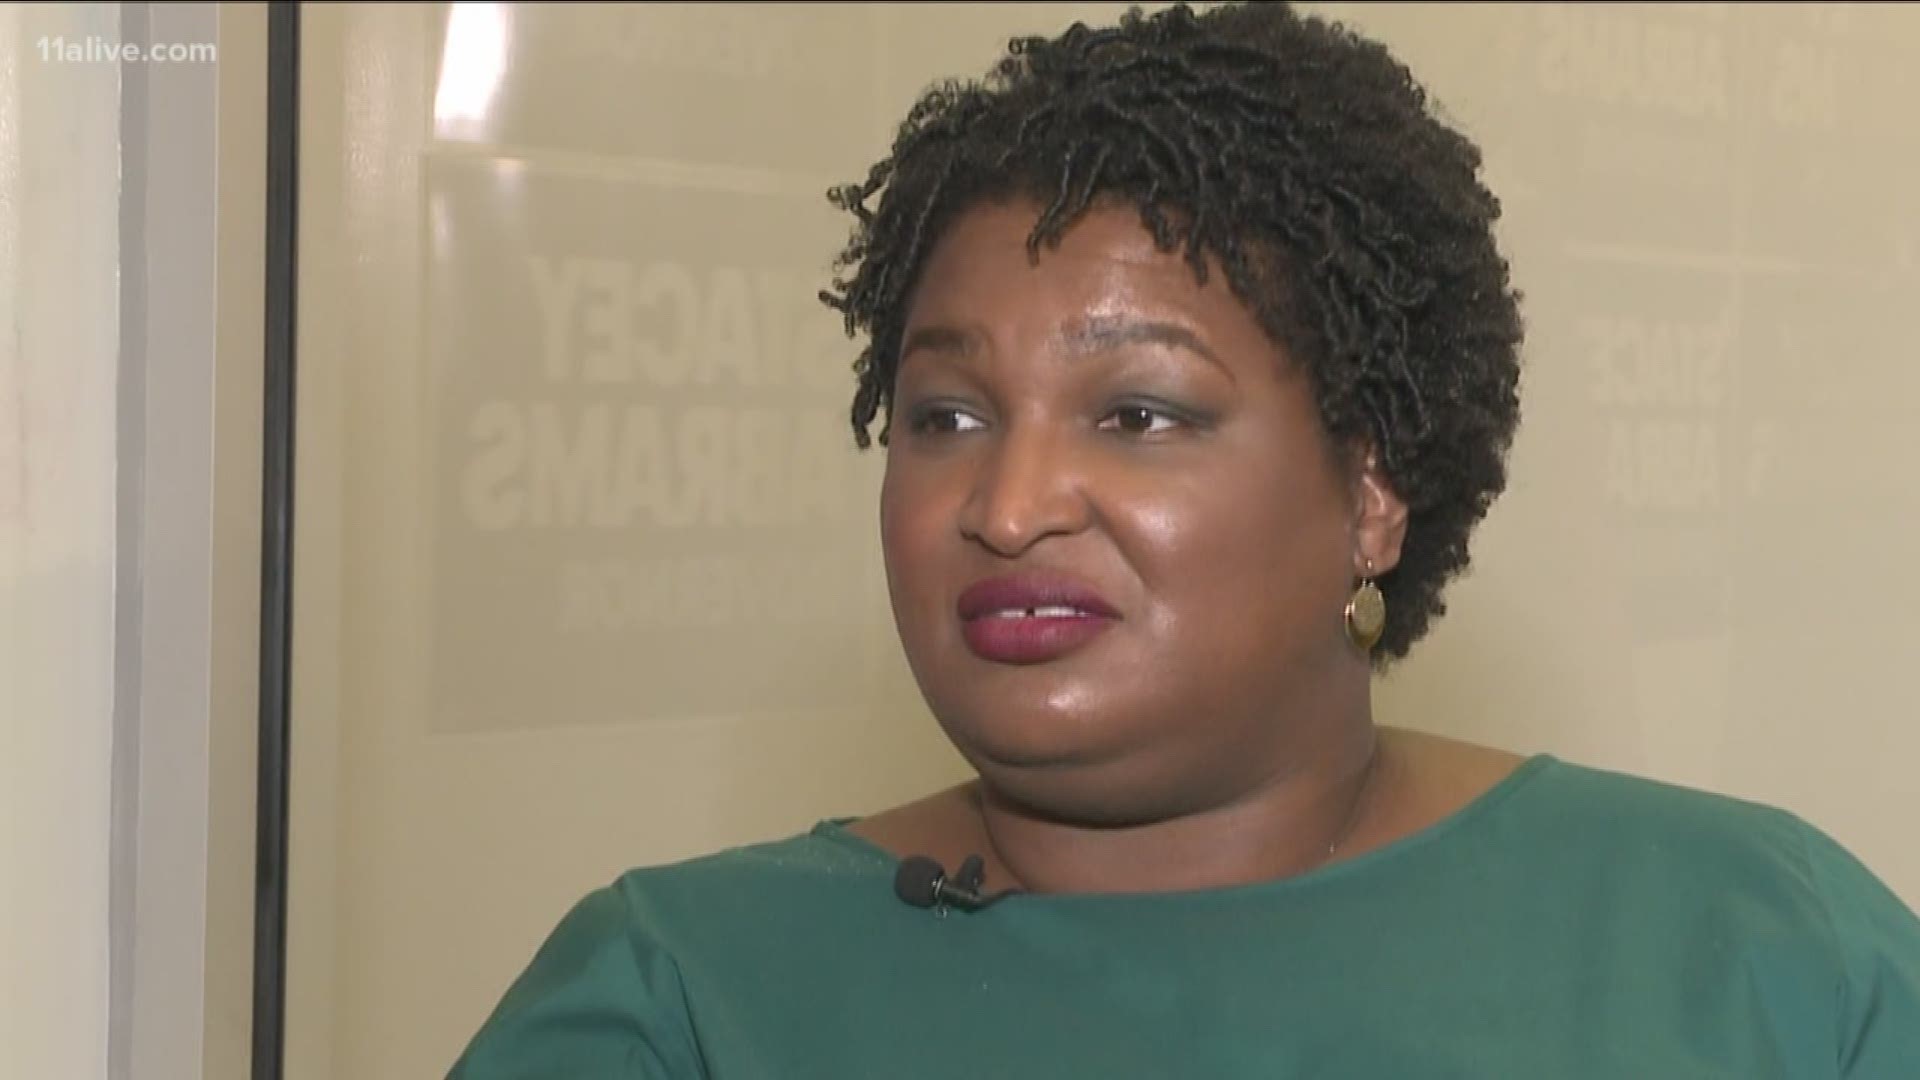 A one-on-one talk with Stacey Abrams about the past, the present and the future after her loss to Brian Kemp in the gubernatorial election.